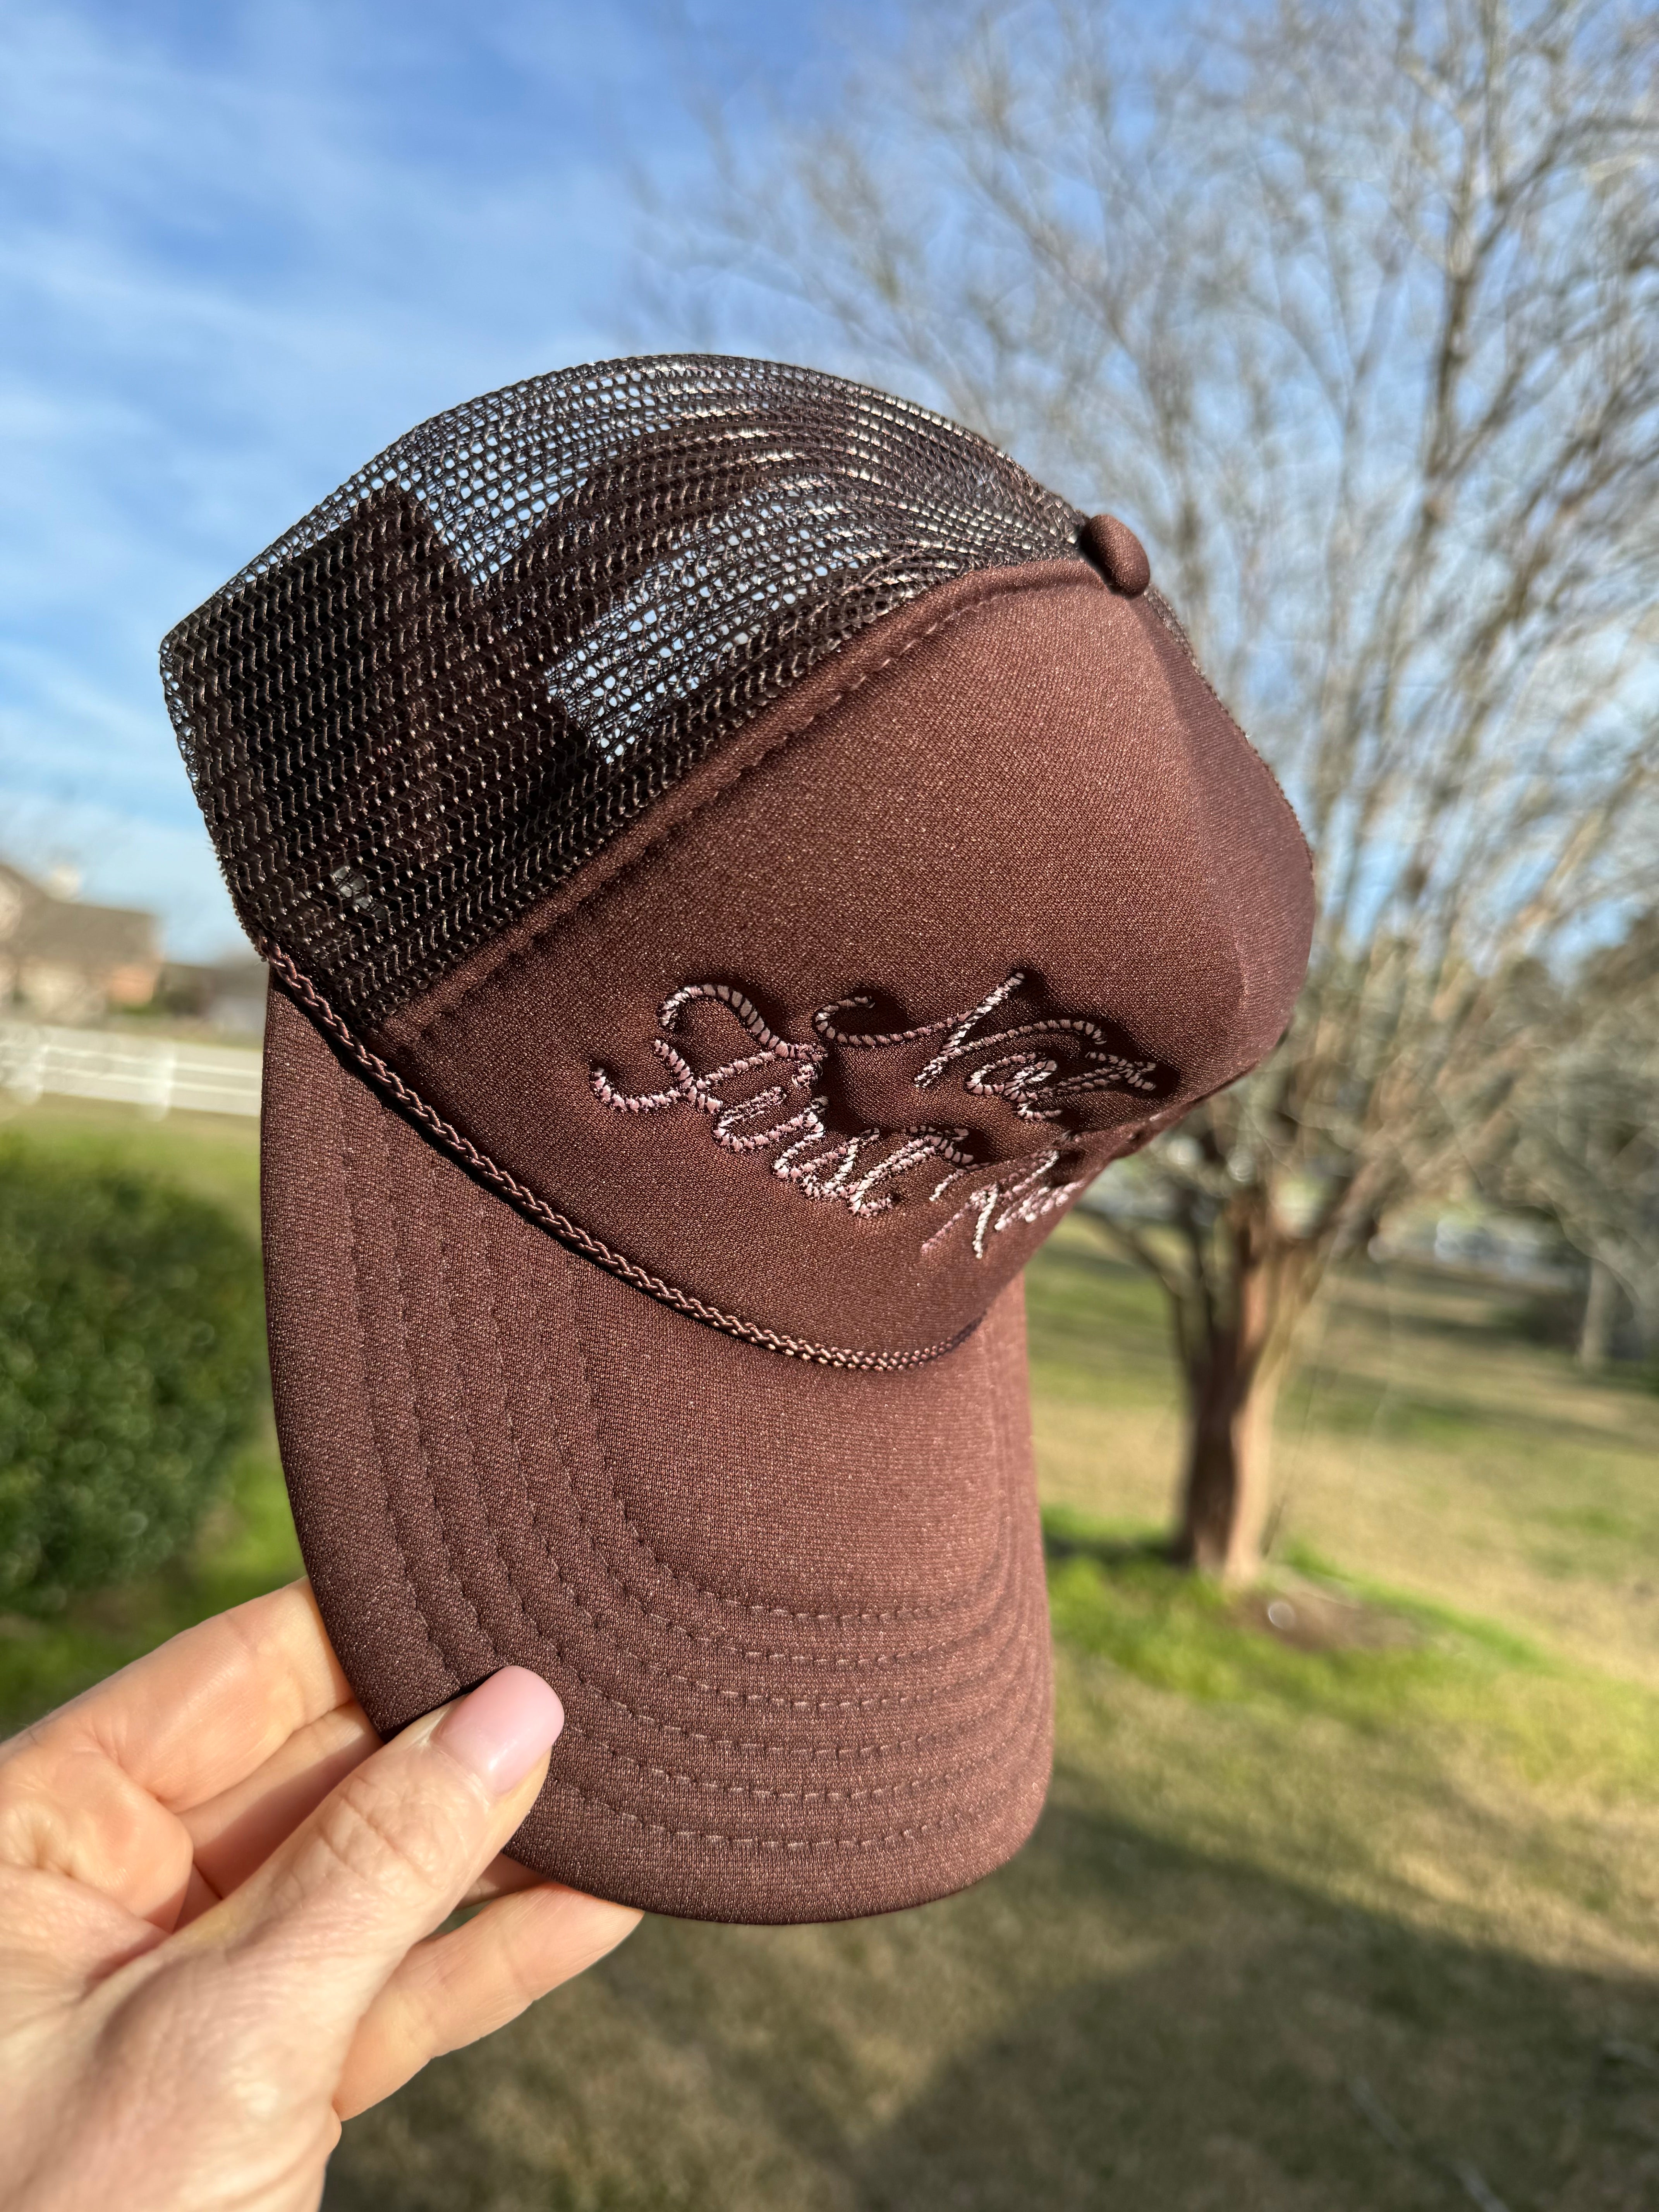 Not My First Rodeo Trucker Hat